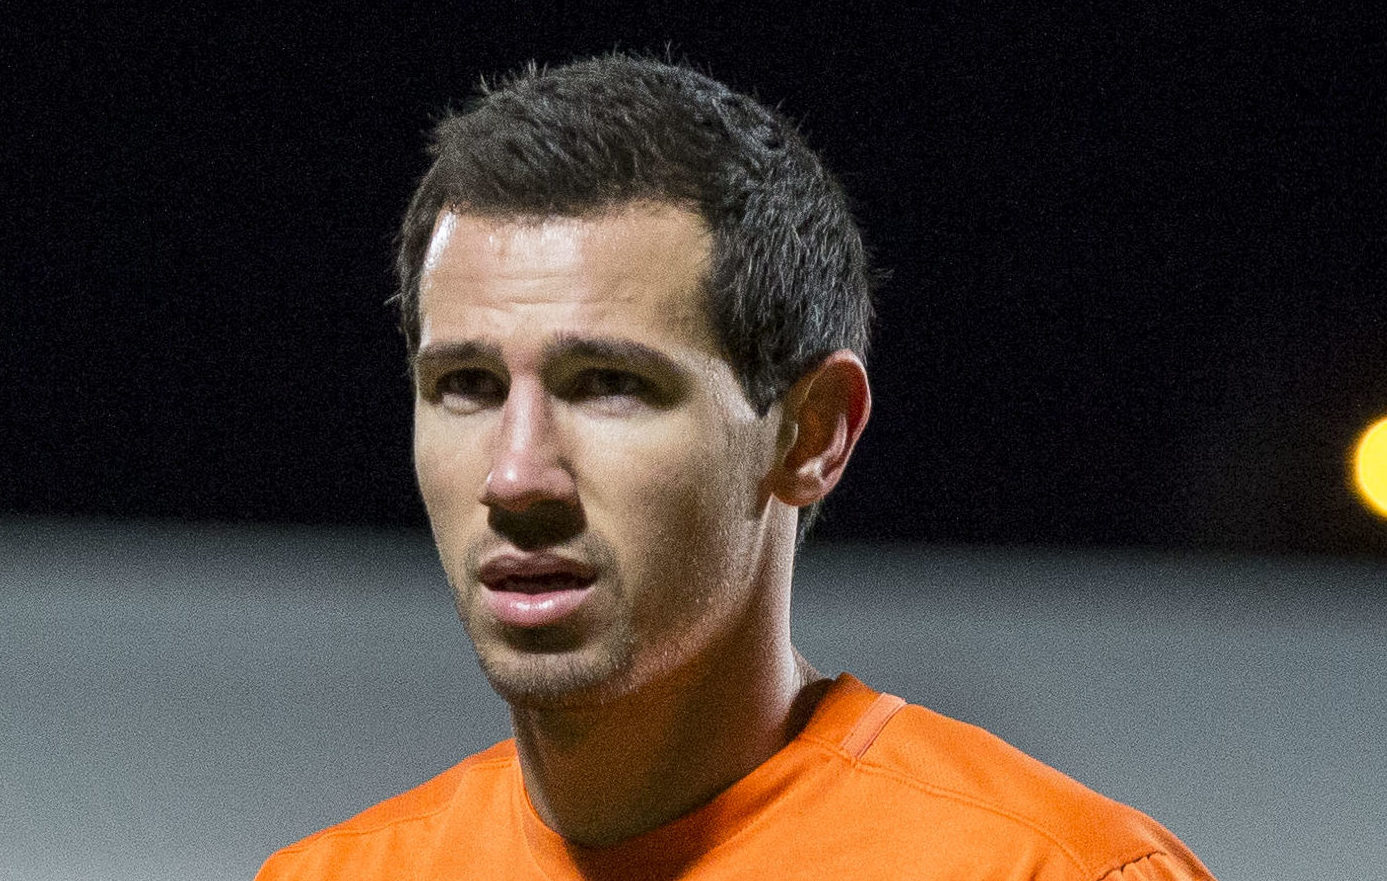 Ryan McGowan played for Dundee United in 2015/16.